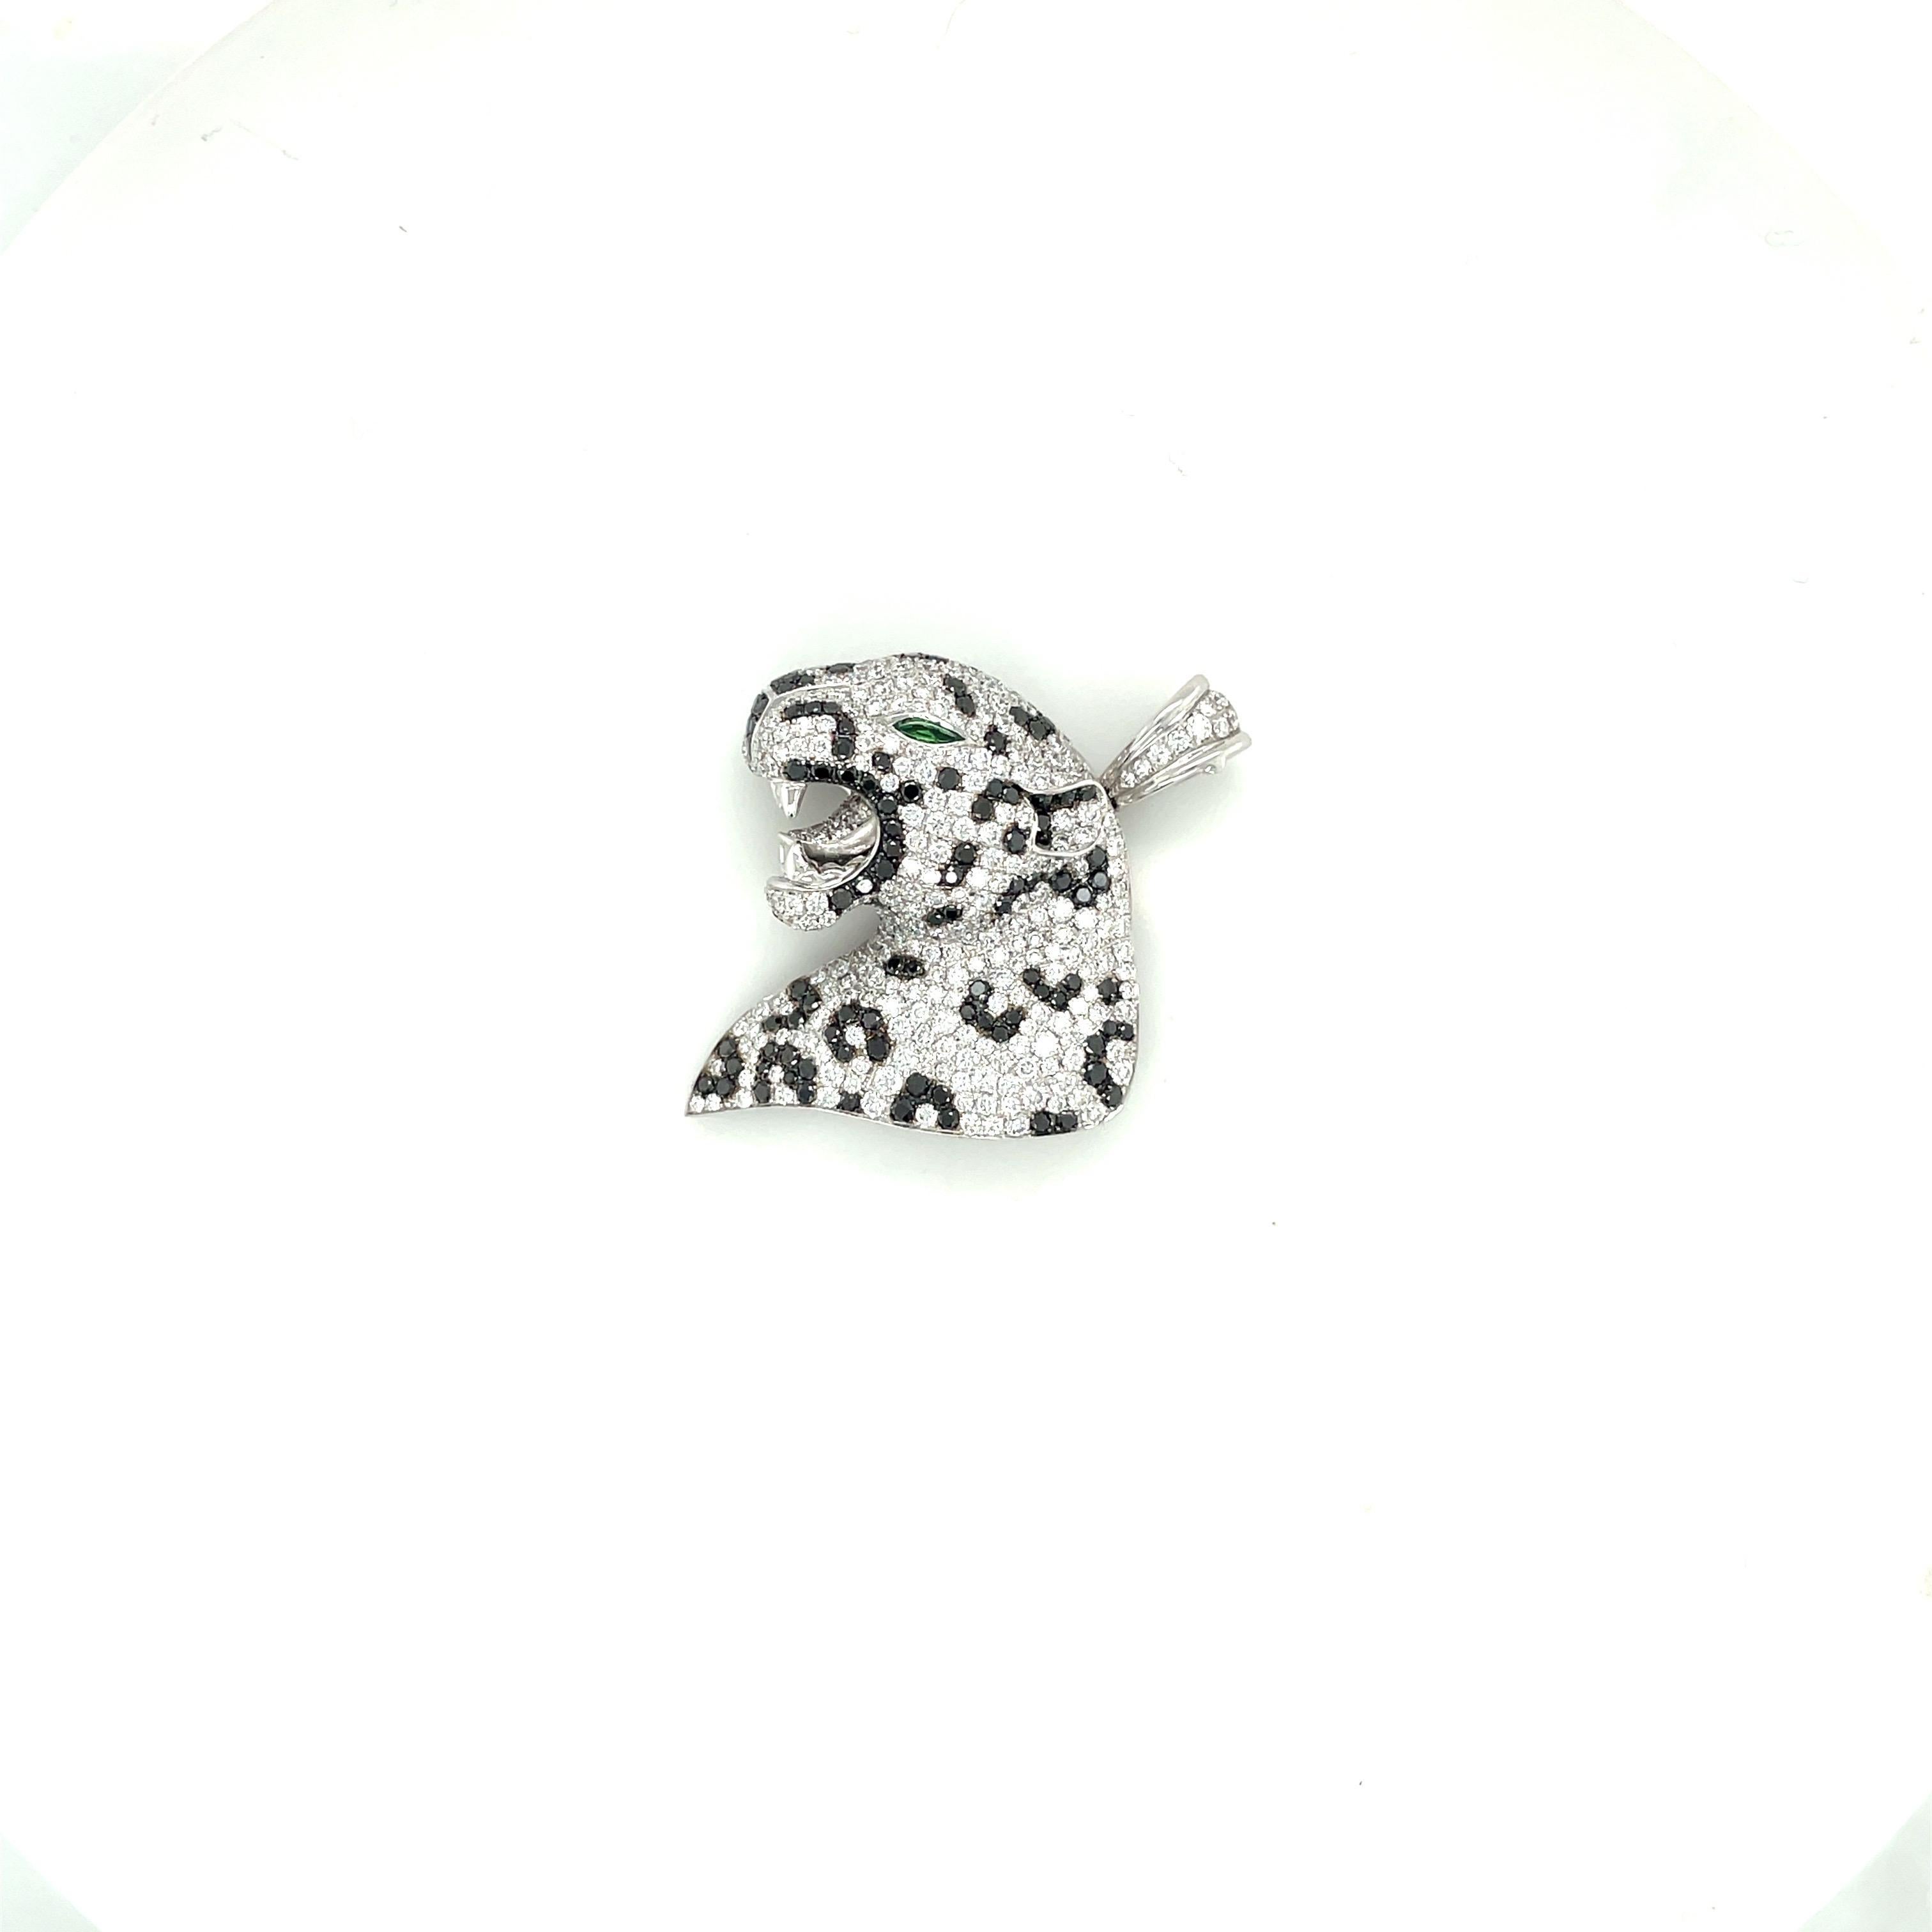 This fierce 18 karat white gold panther pendant is meticulously set with black and white round brilliant diamonds. His eye is a marquis tsavorite stone. The panther measures 1.25